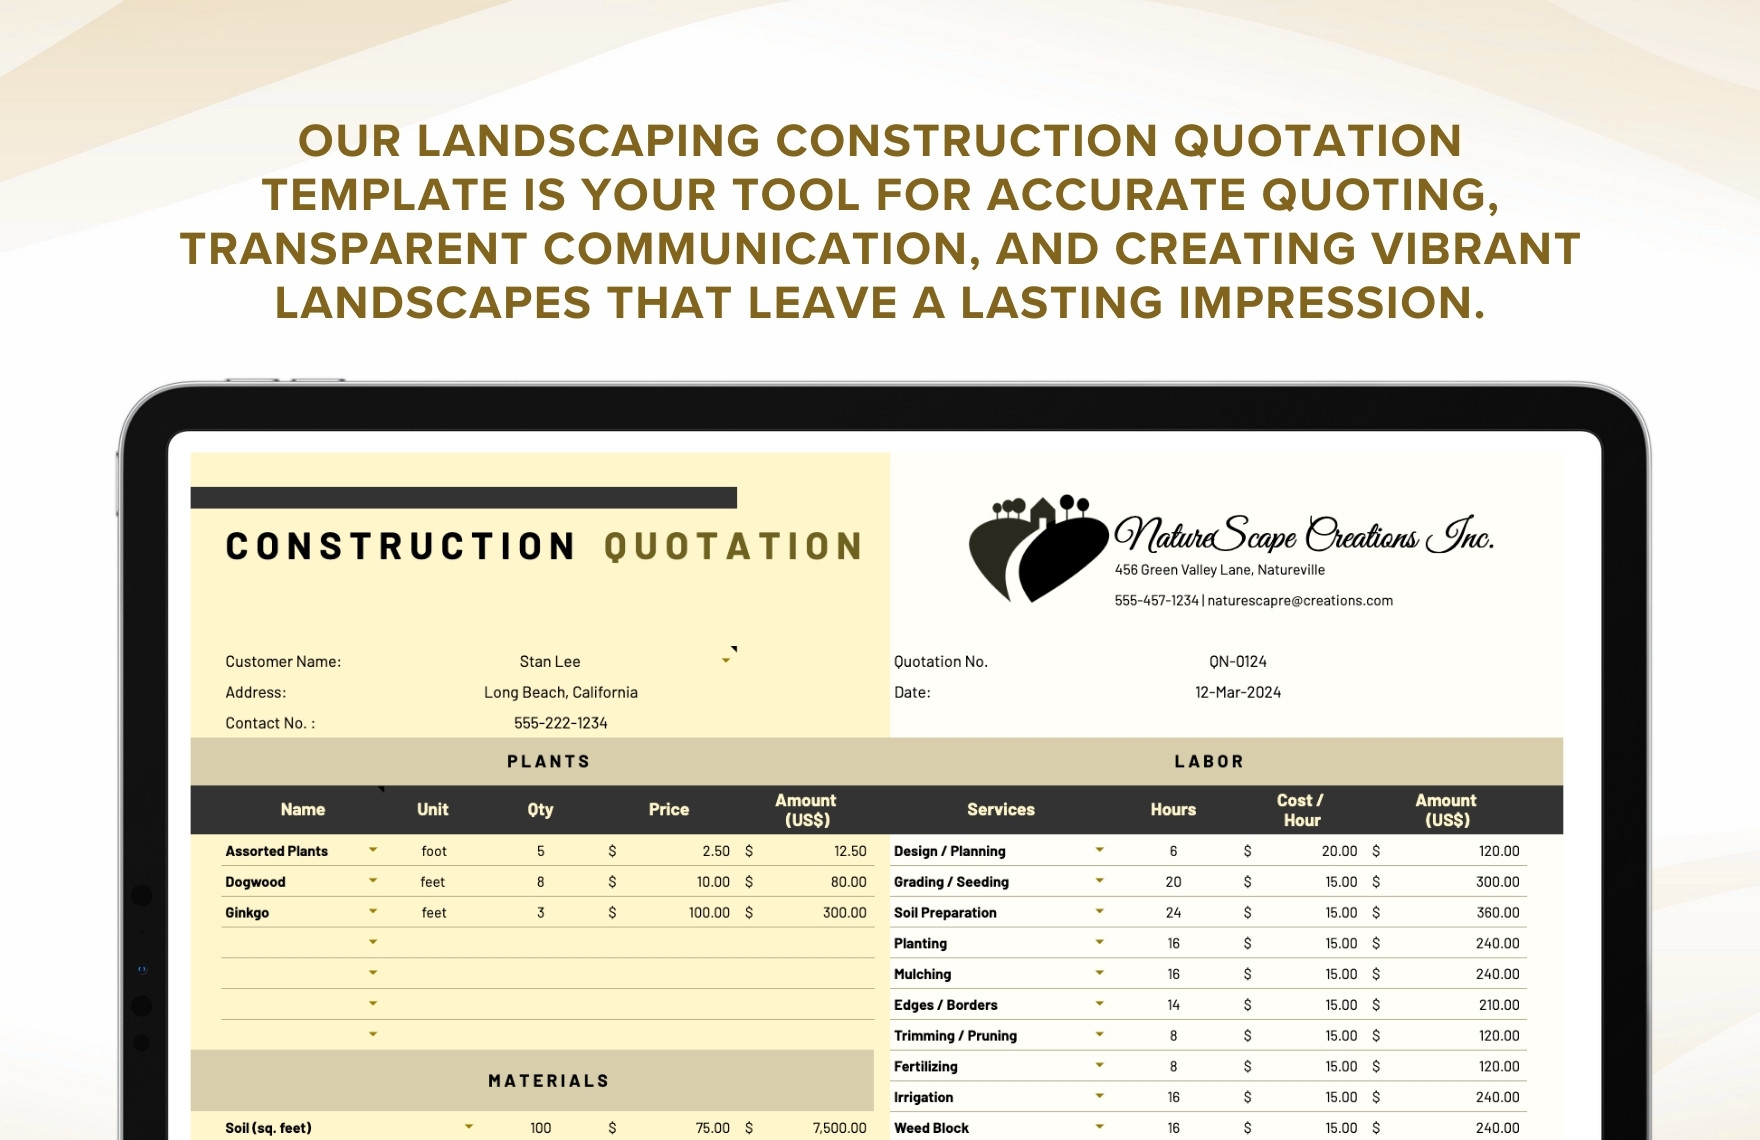 Landscaping Construction Quotation Template